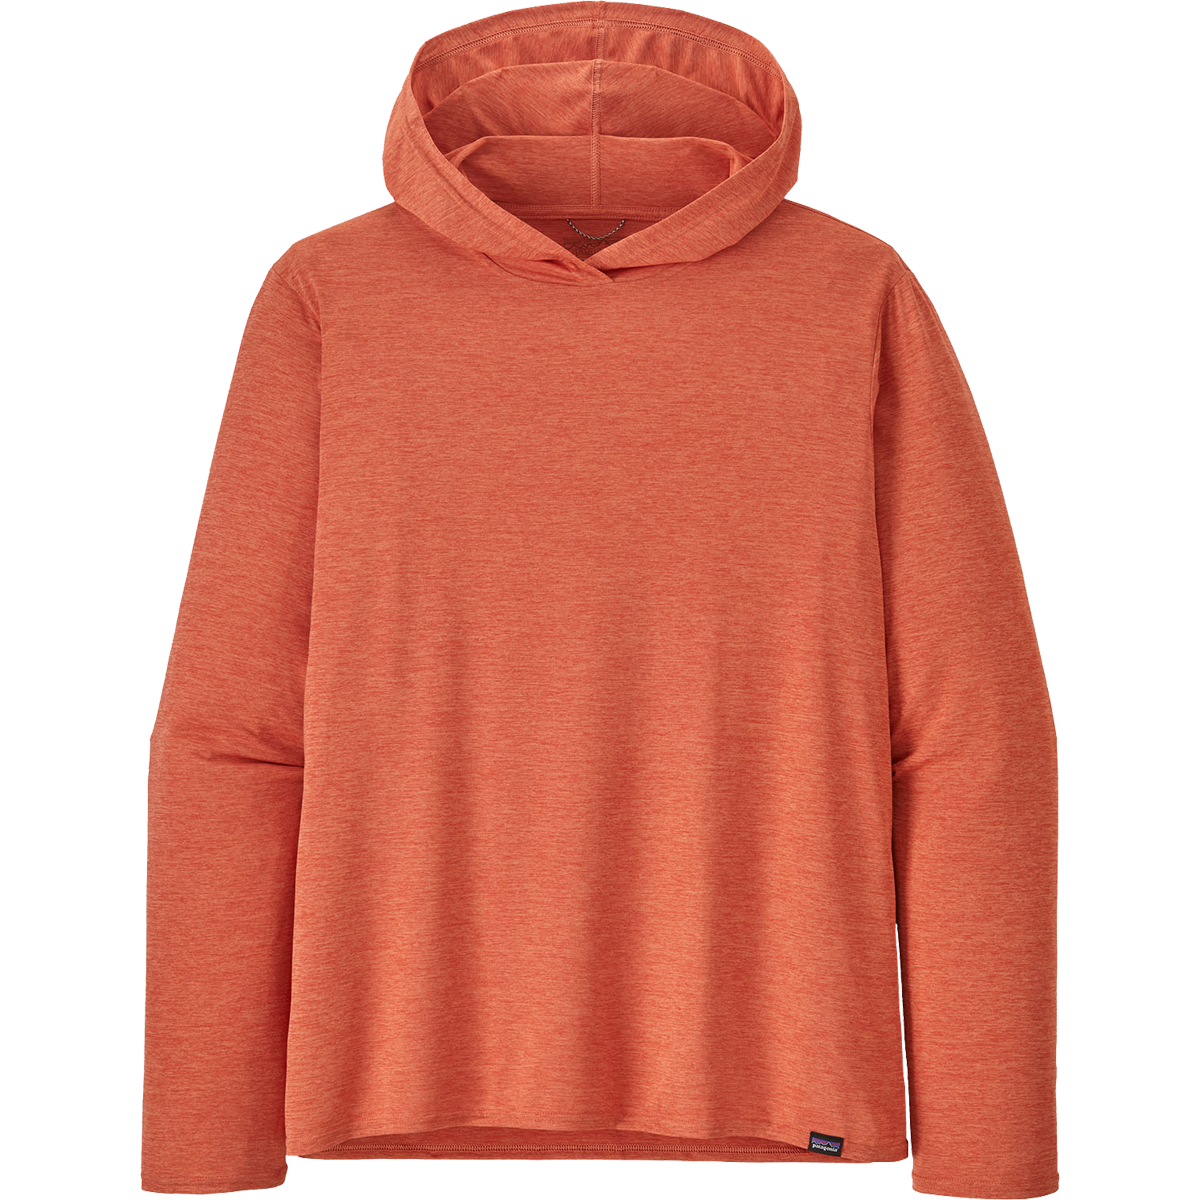 Men's Capilene Cool Daily Graphic Relaxed Fit Hoody alternate view